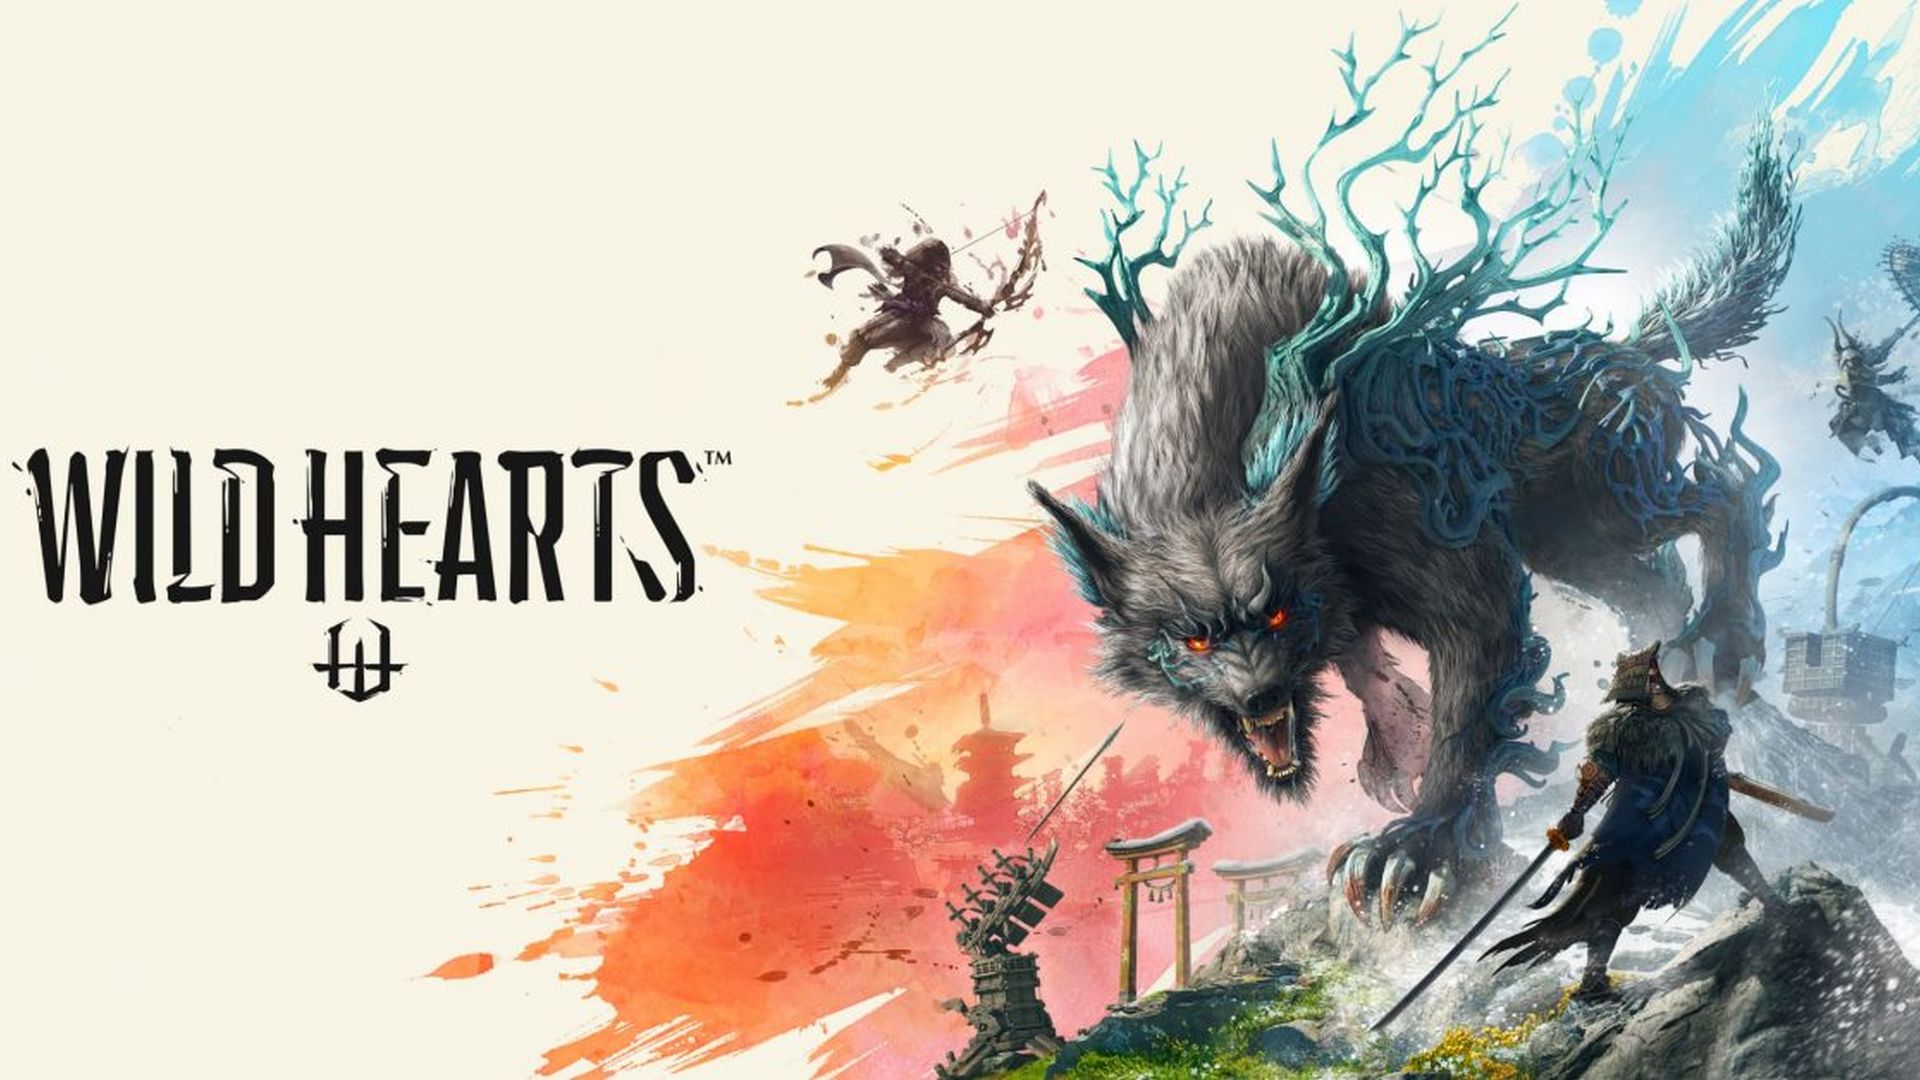 Try Wild Hearts with Game Pass & EA Play! Pay $1 and enjoy a 10-hour